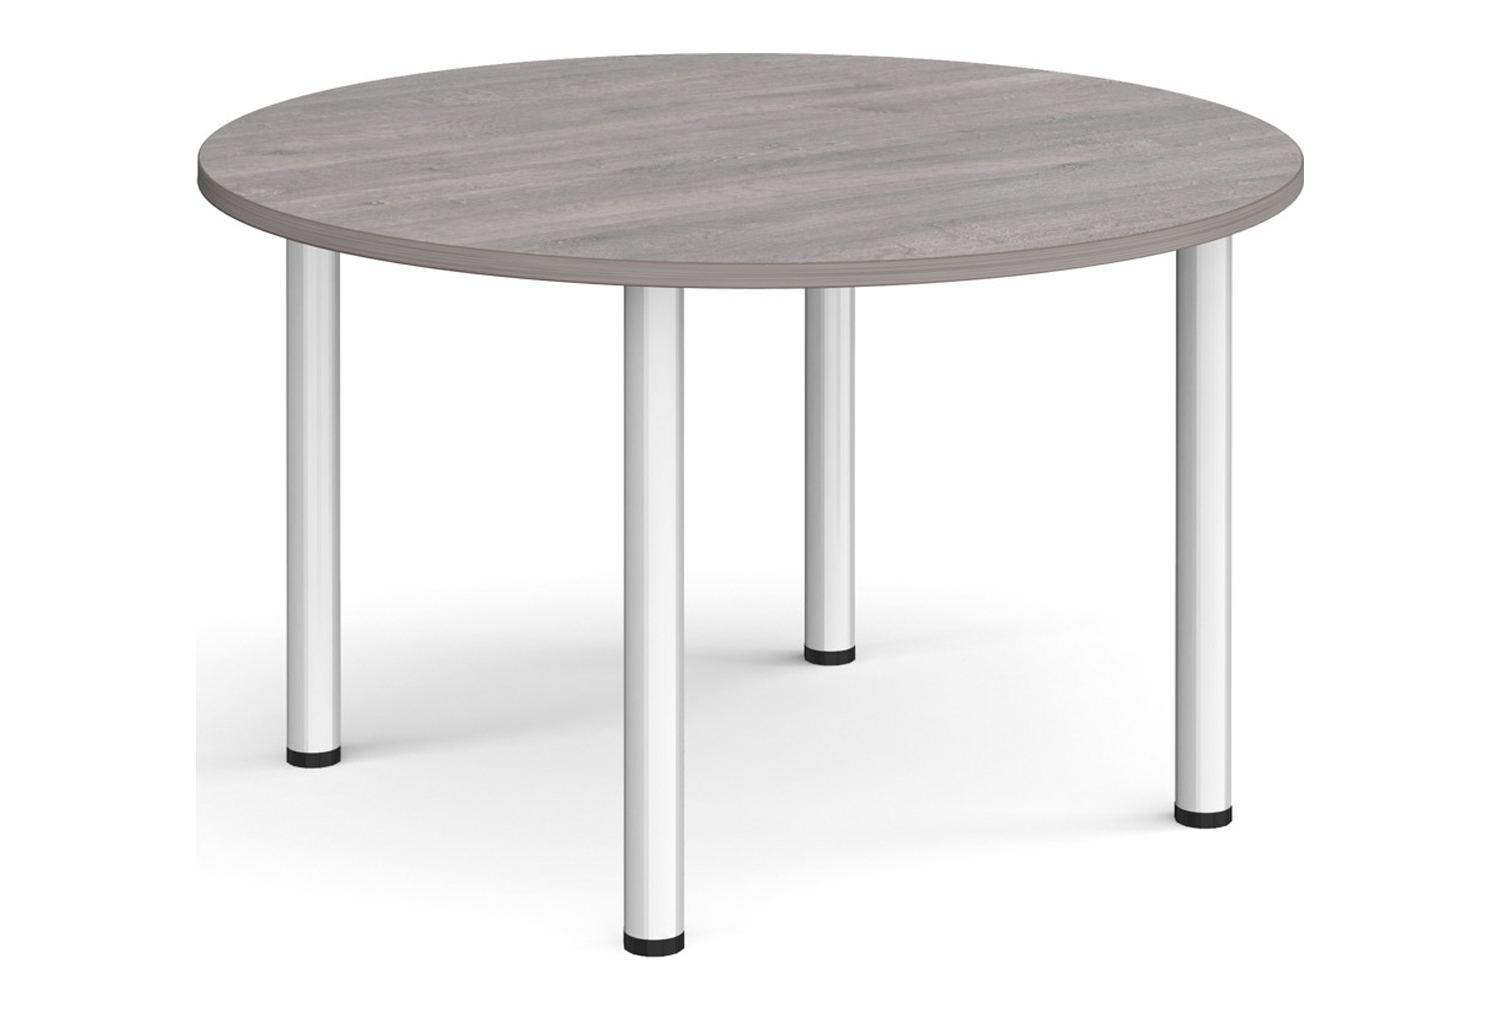 Bowers Round Meeting Table, 120diax73h (cm), Grey Oak